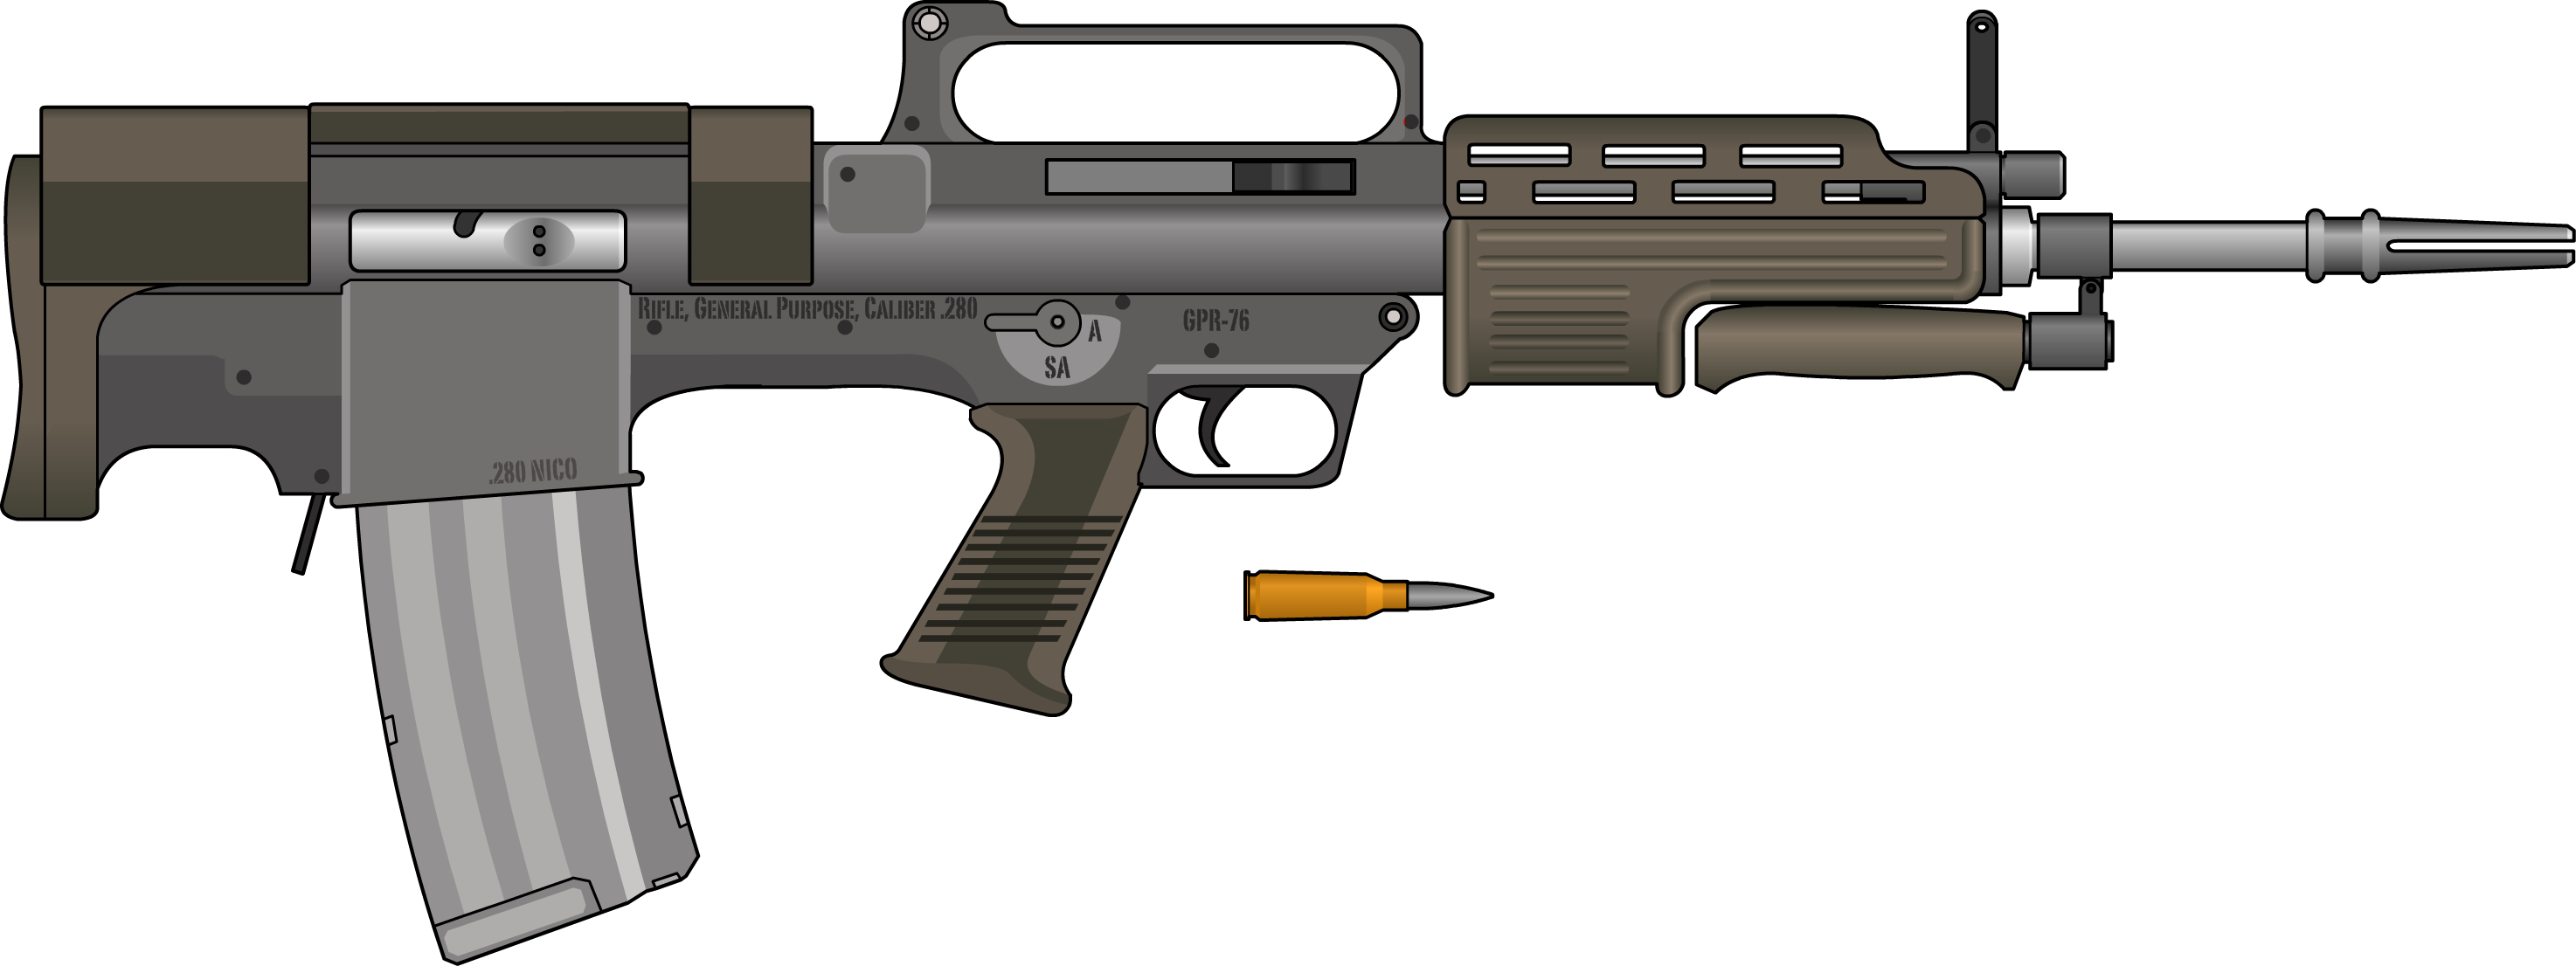 Weapons Gpr-76 Assault Rifle HD Wallpaper | Background Image